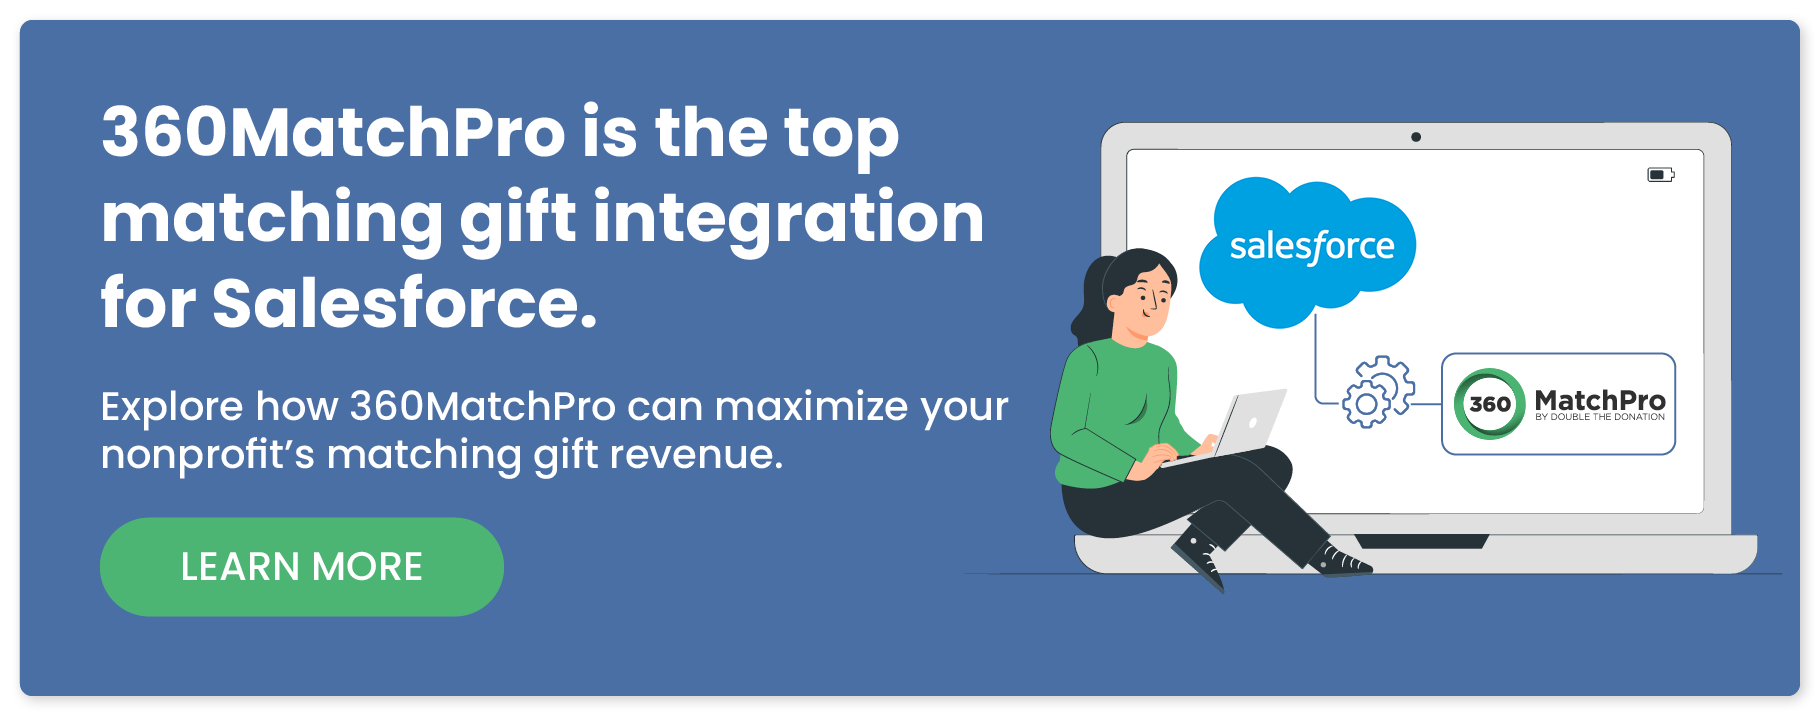 360Match is the top matching gift integration for Salesforce. Explore how 360MatchPro can maximize your nonprofit's matching gift revenue. Learn more.